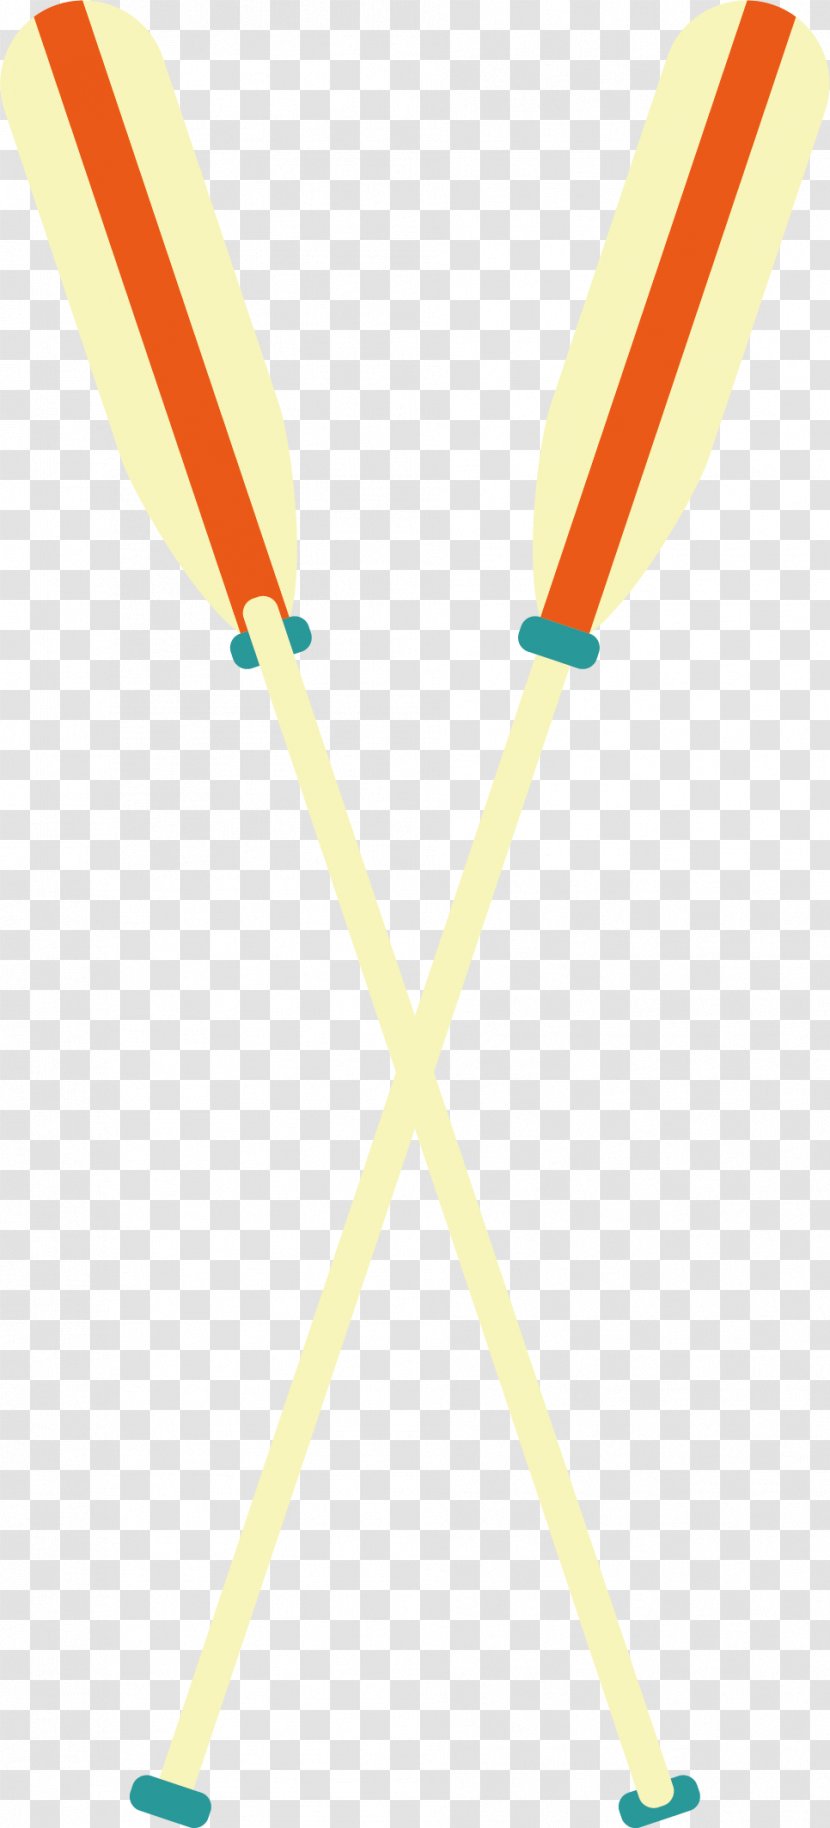 Rowing Oar - Vector Hand-painted Oars Transparent PNG